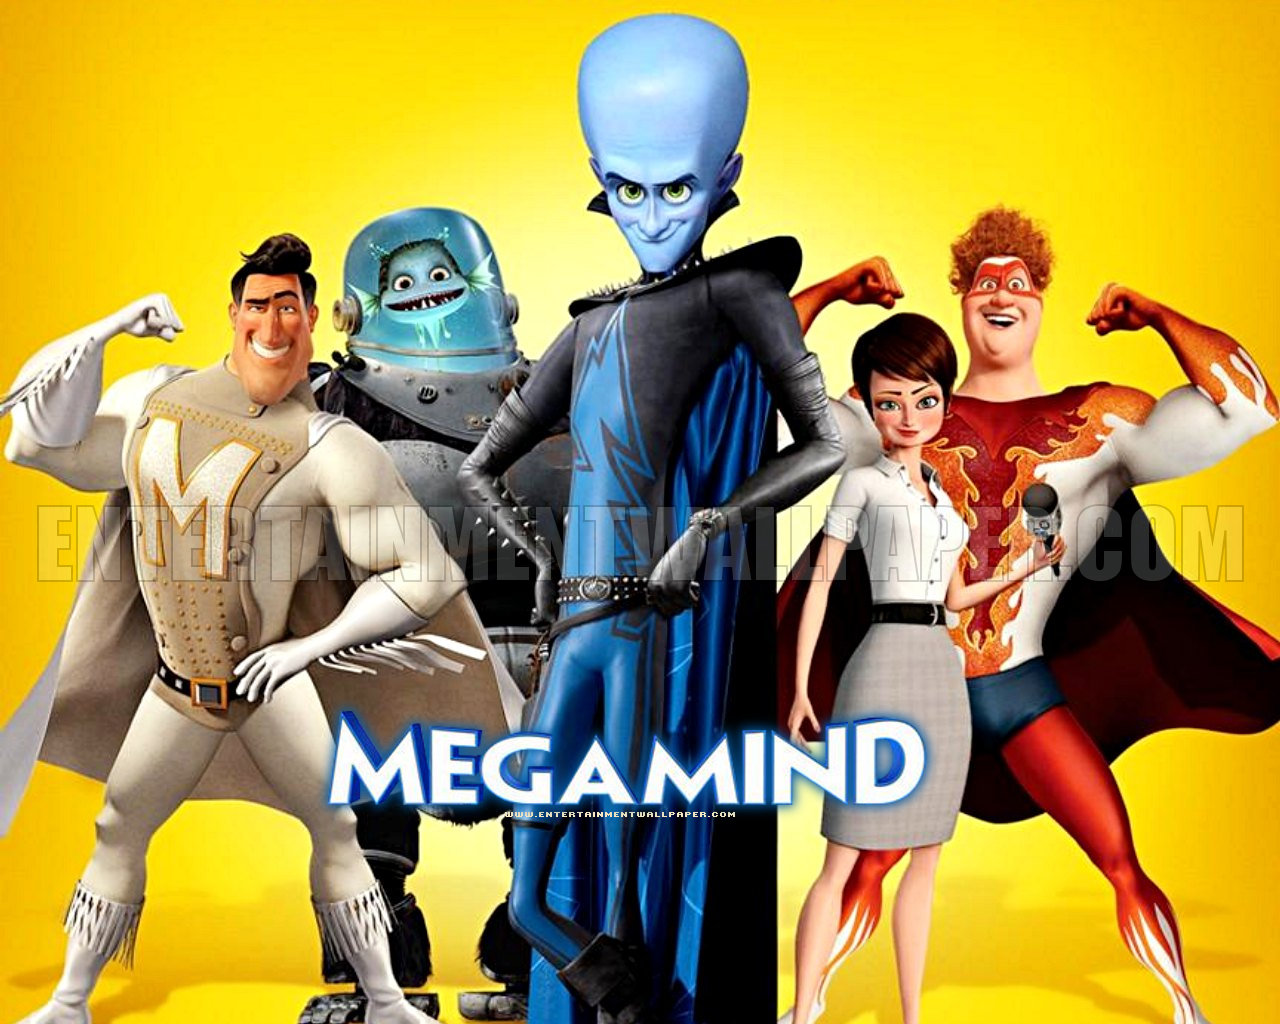 Original Size, Download Now - Megamind 2010 Movie Cover , HD Wallpaper & Backgrounds